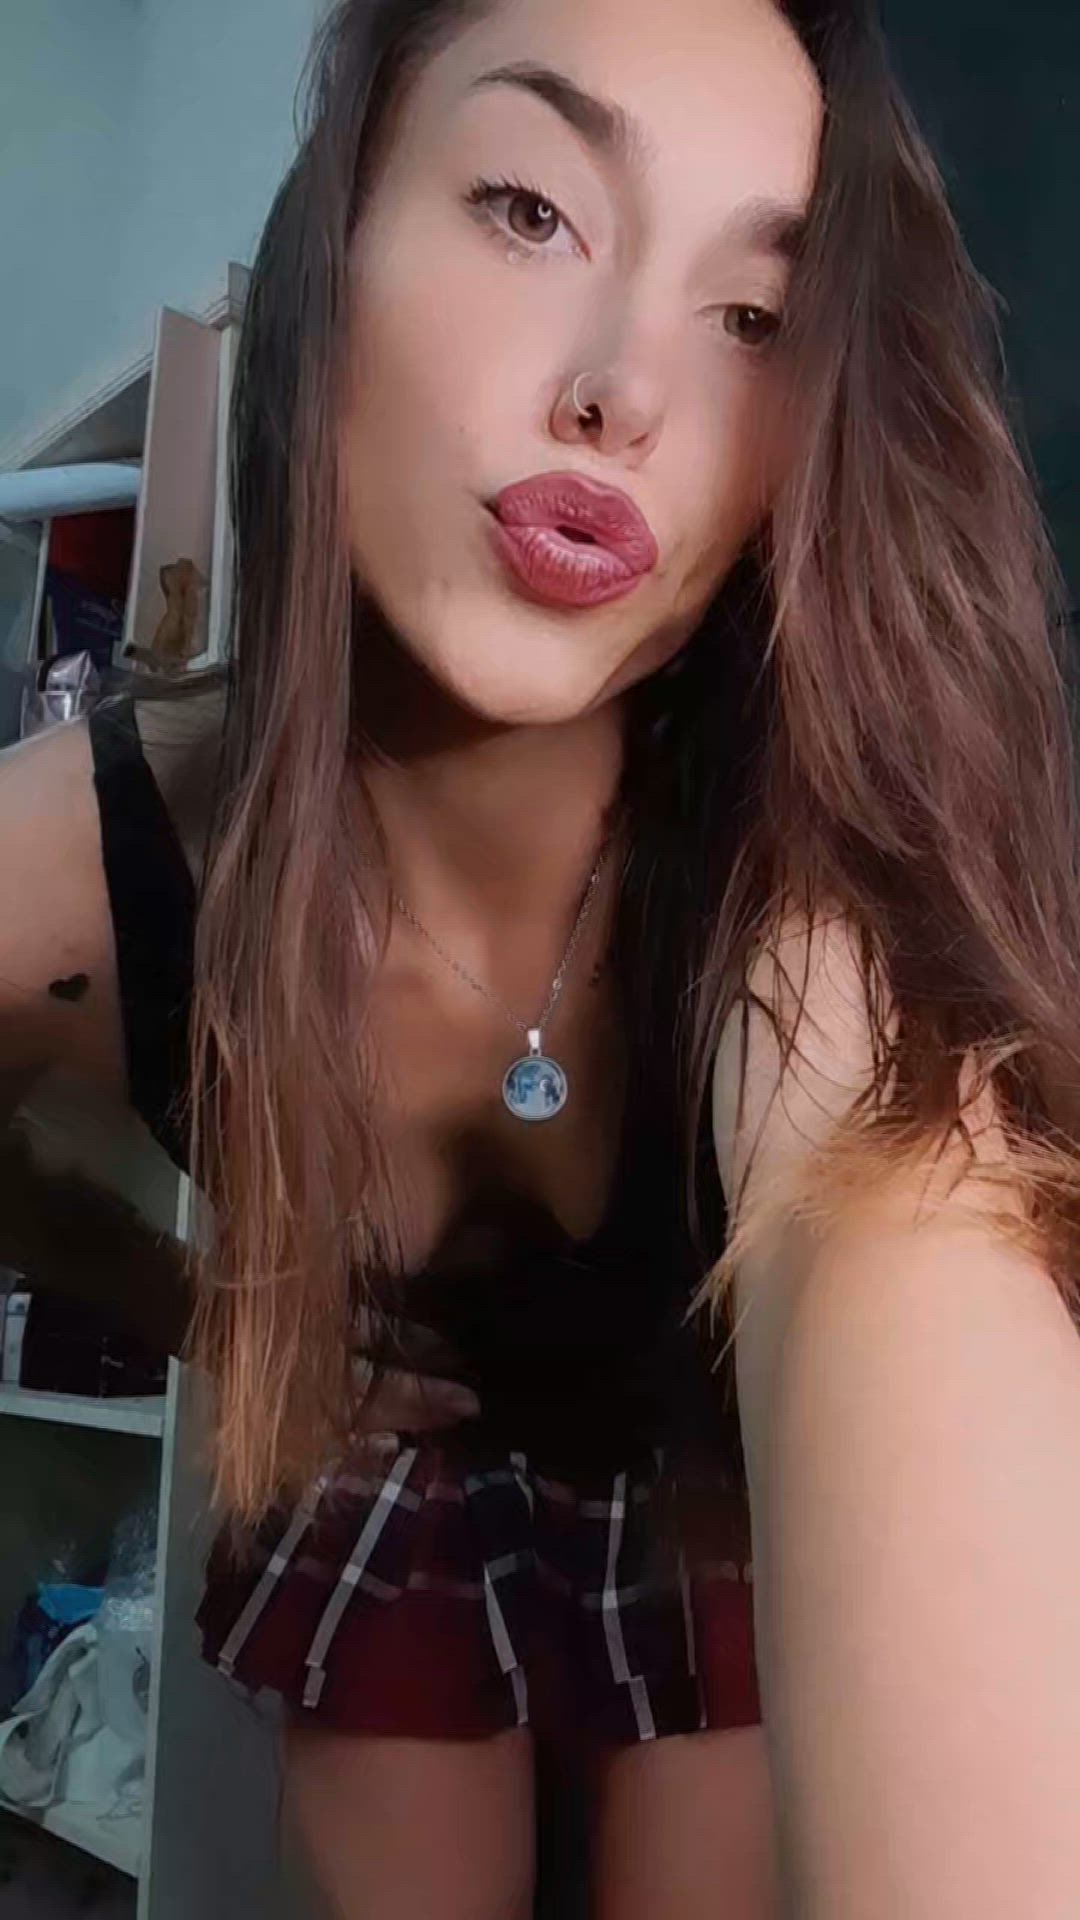 Latina porn video with onlyfans model babylittlebratz <strong>@babylittlebratz</strong>